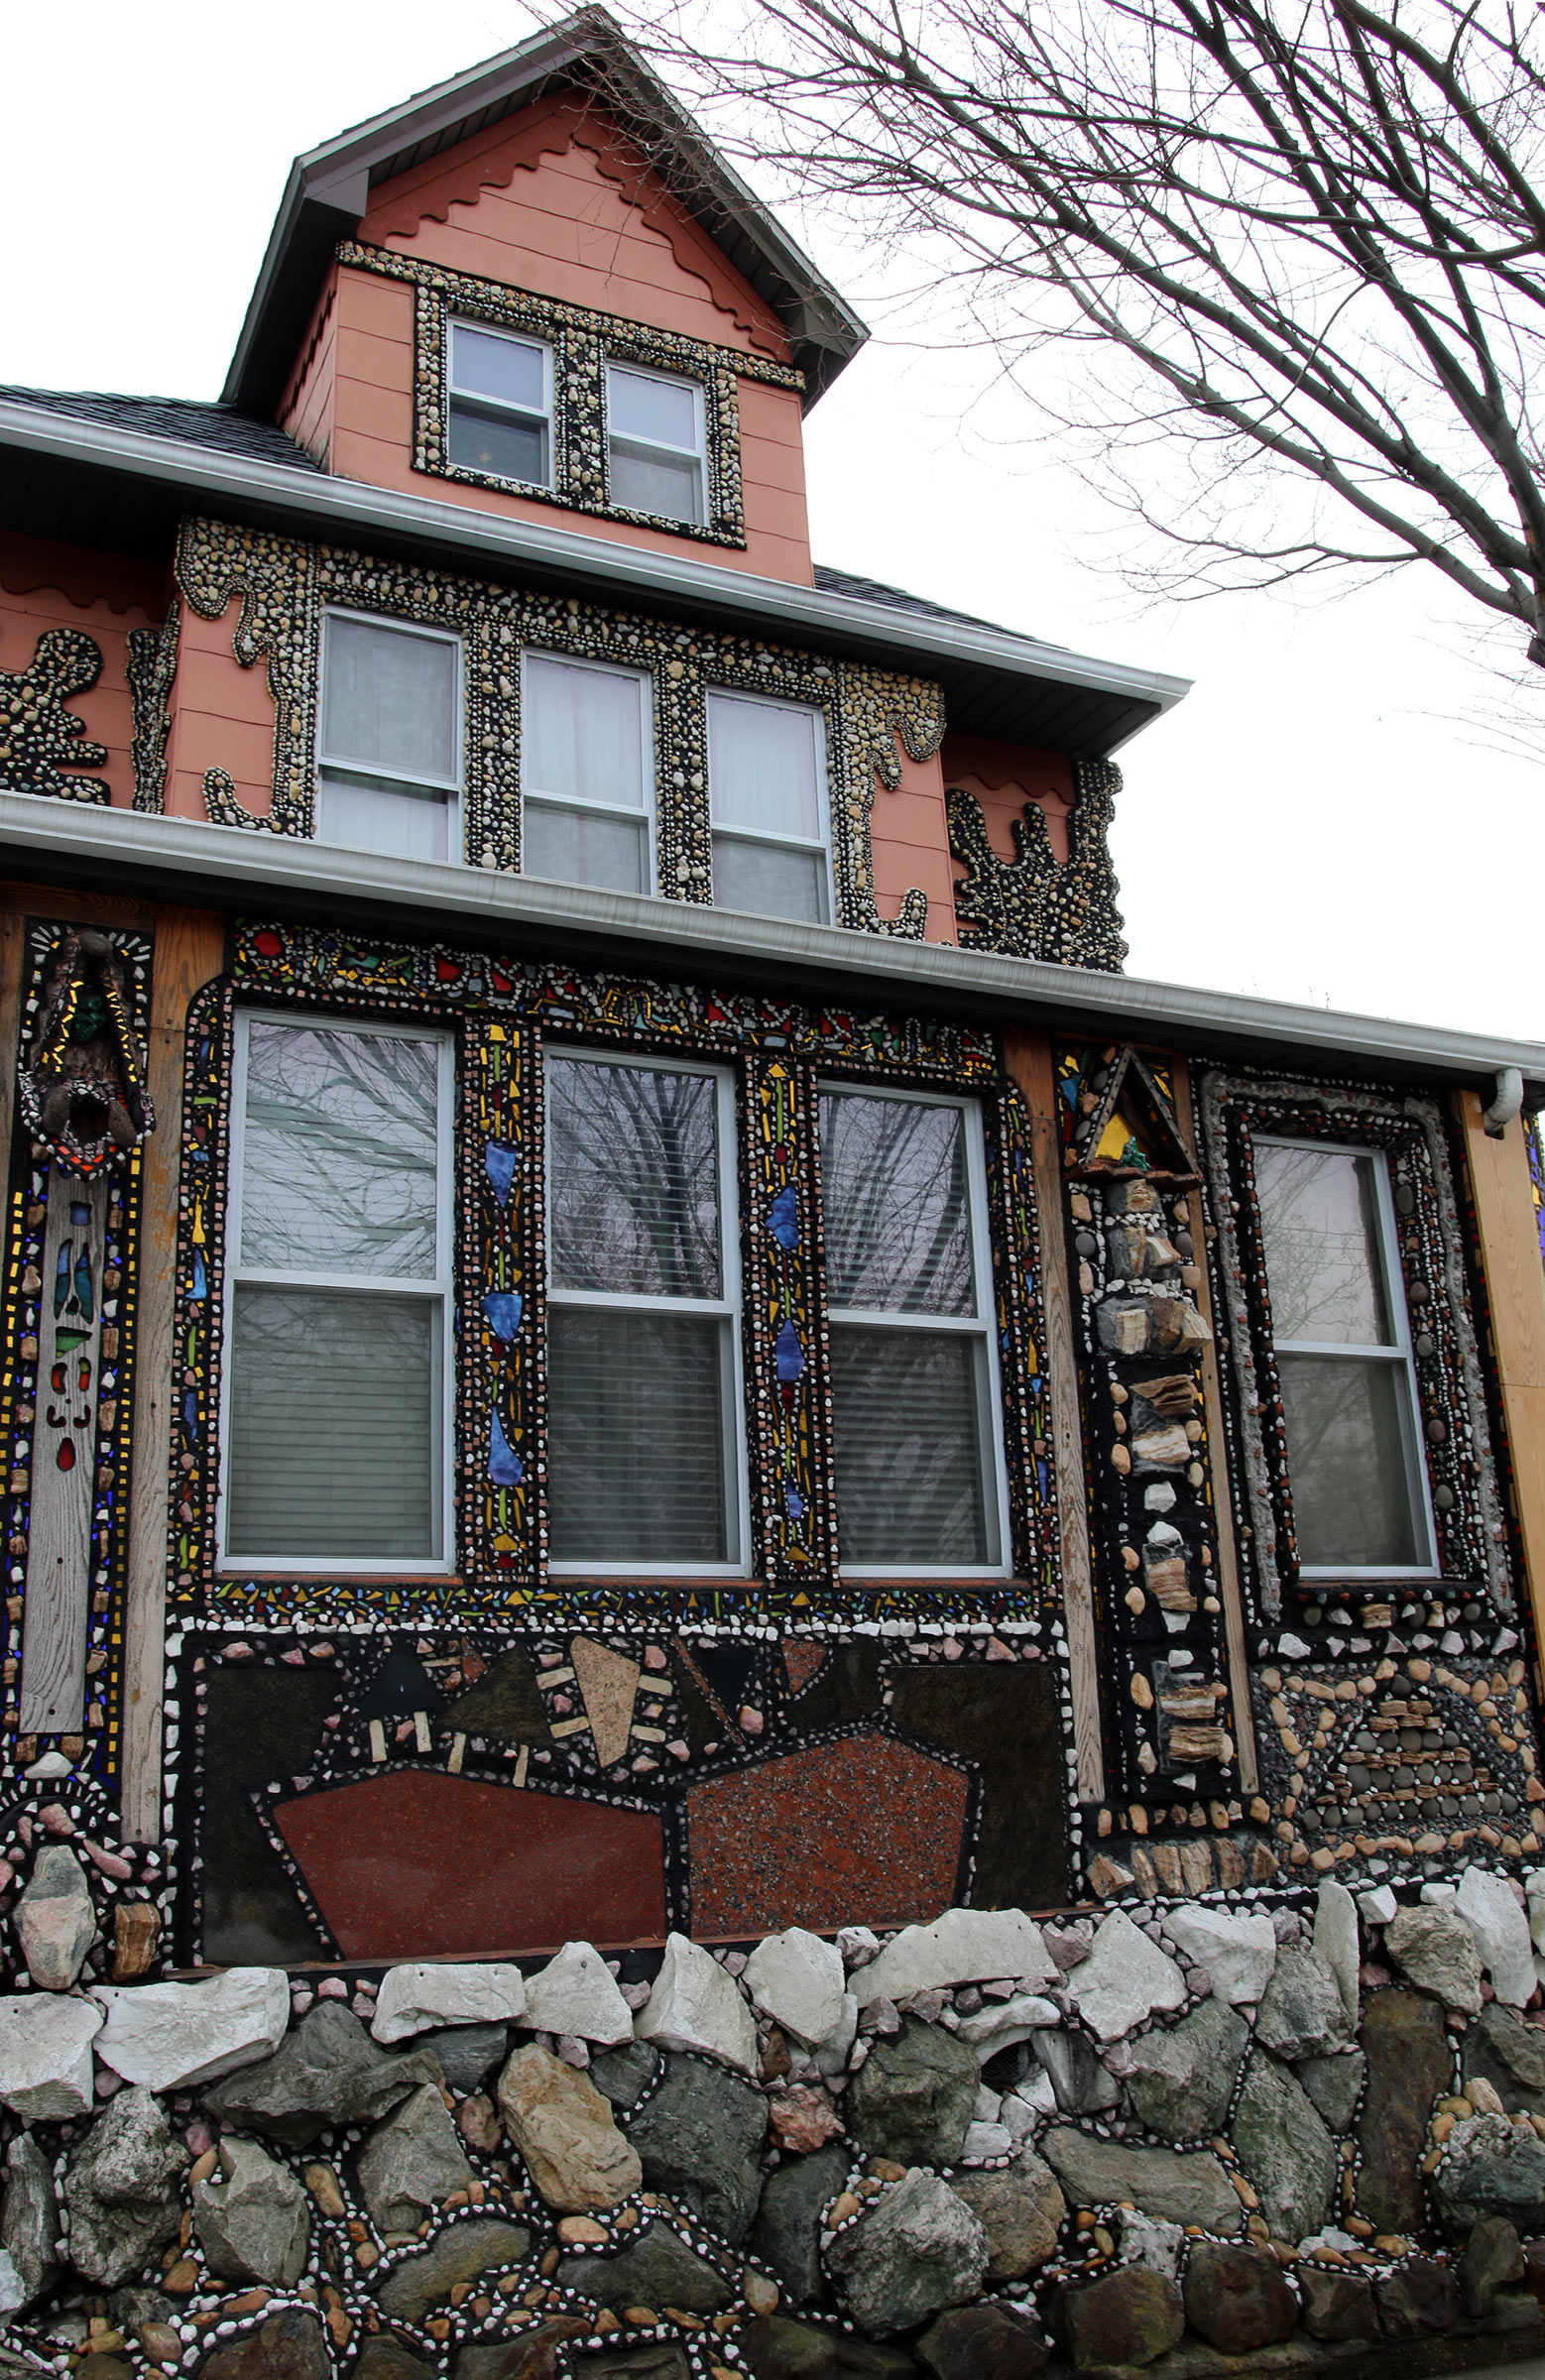 The elaborately ornamented exterior of Milford Graves's home.